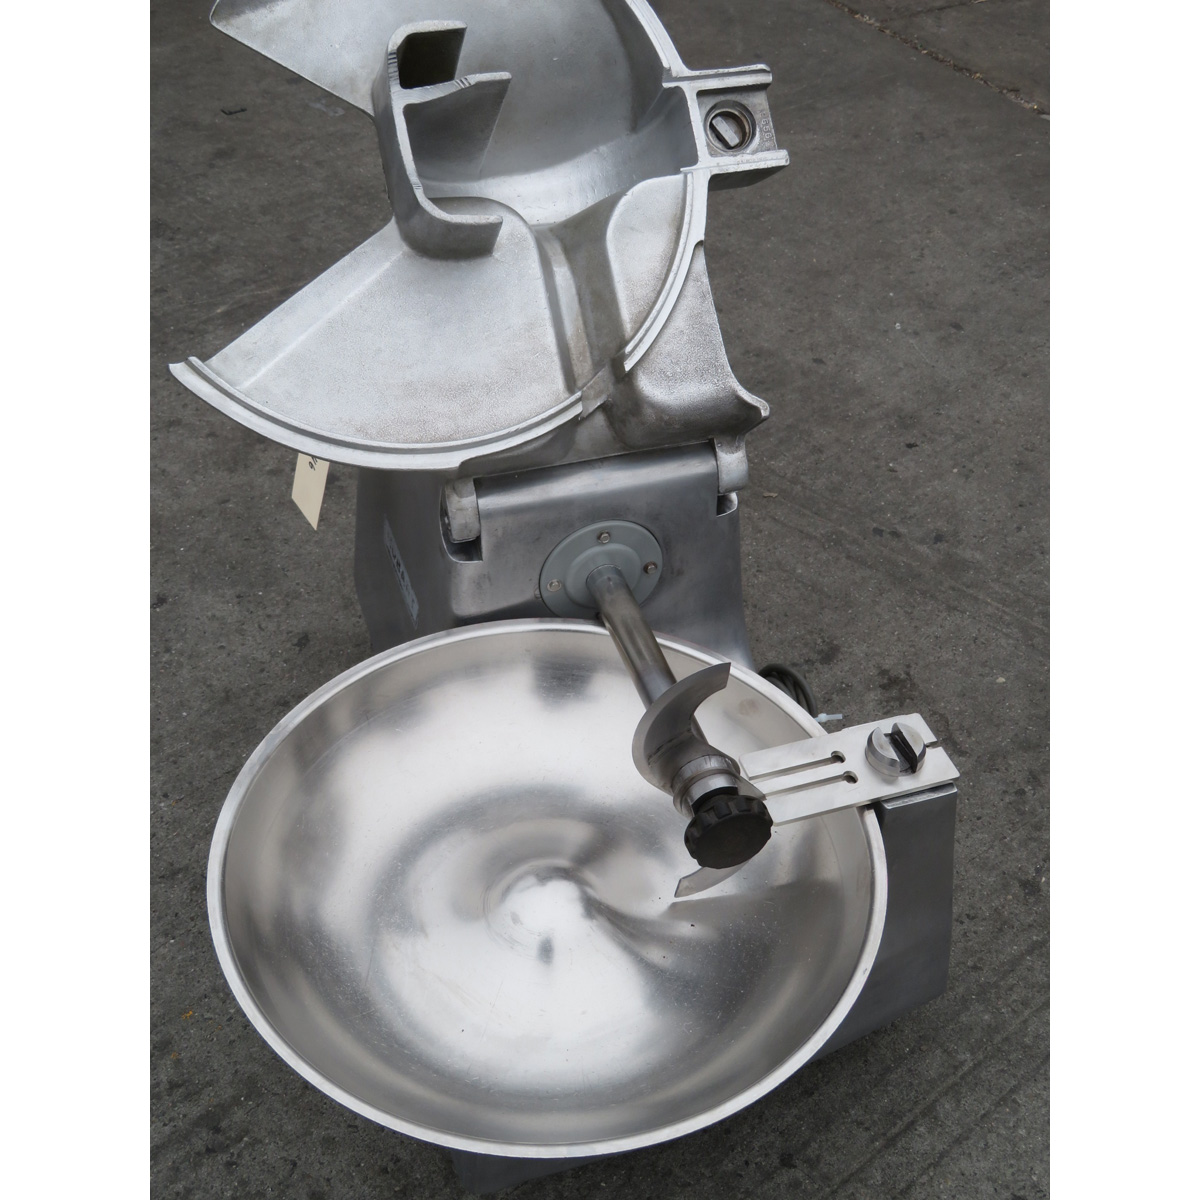 Hobart 84186 Buffalo Food Cutter Chopper, Used Excellent Condition image 2